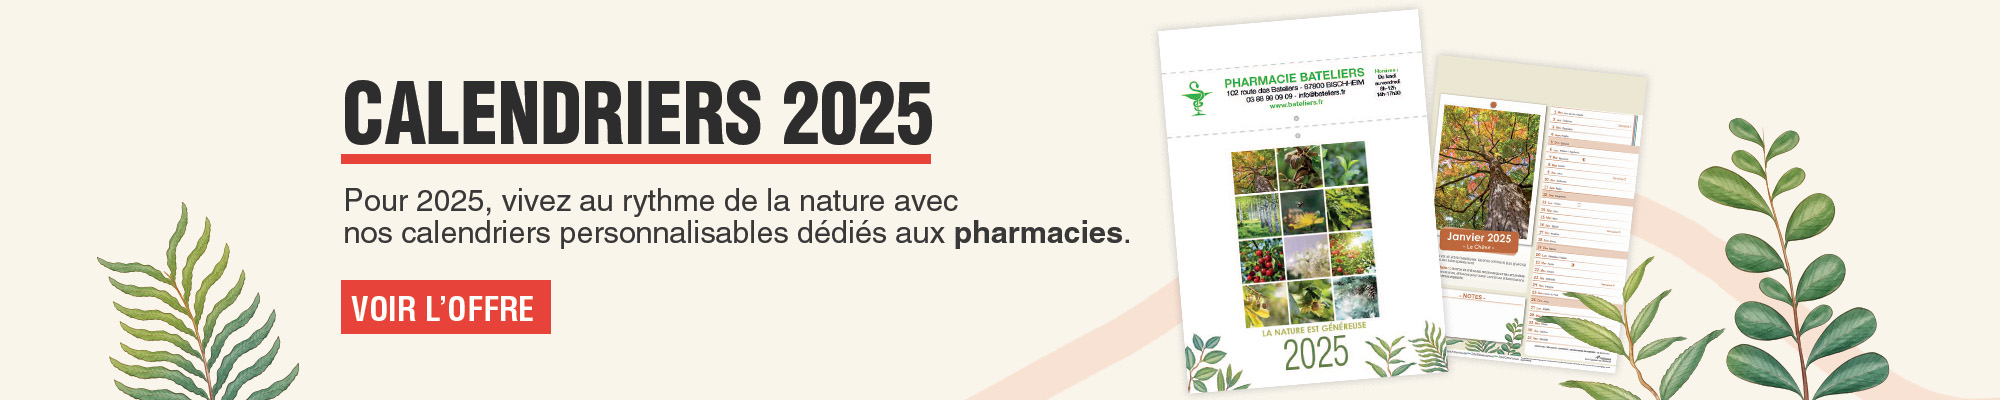 Offre spéciale calendriers pharmacie 2025